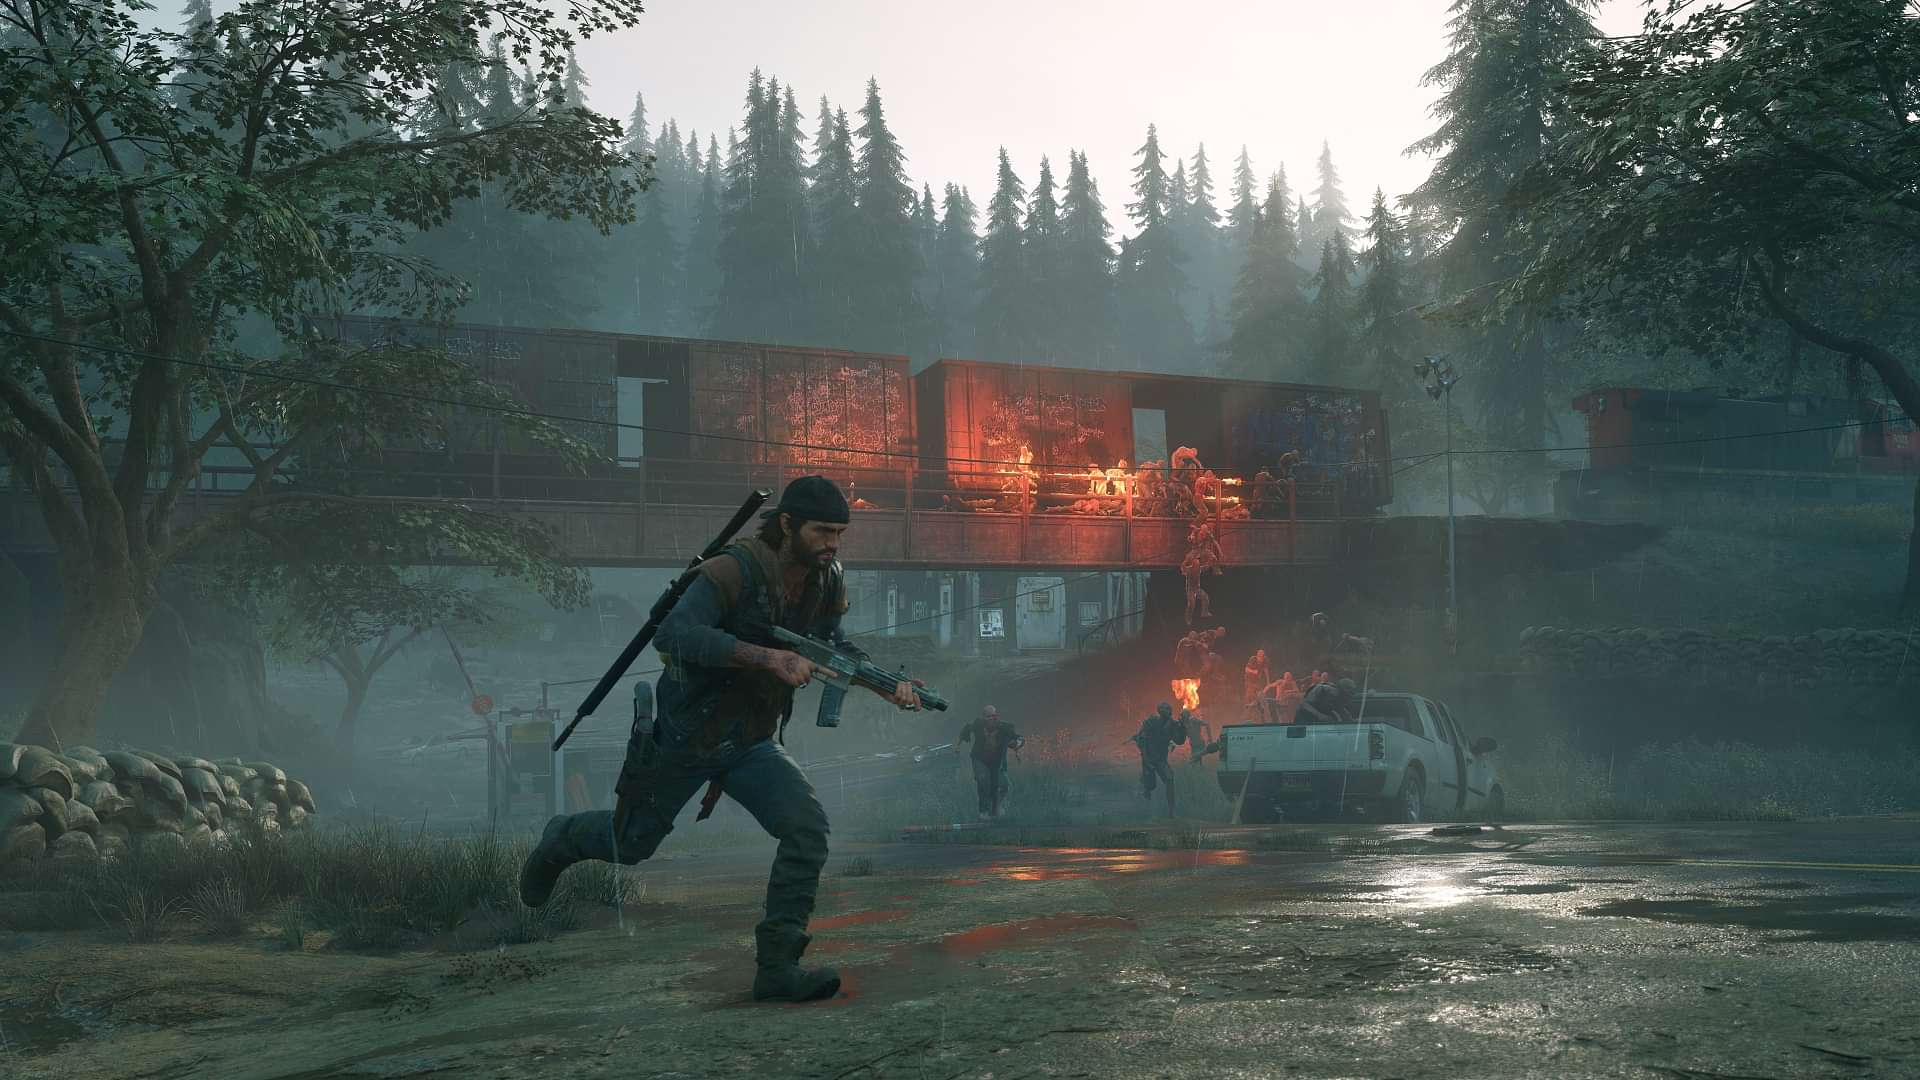 Days Gone (PS4) - The Cover Project